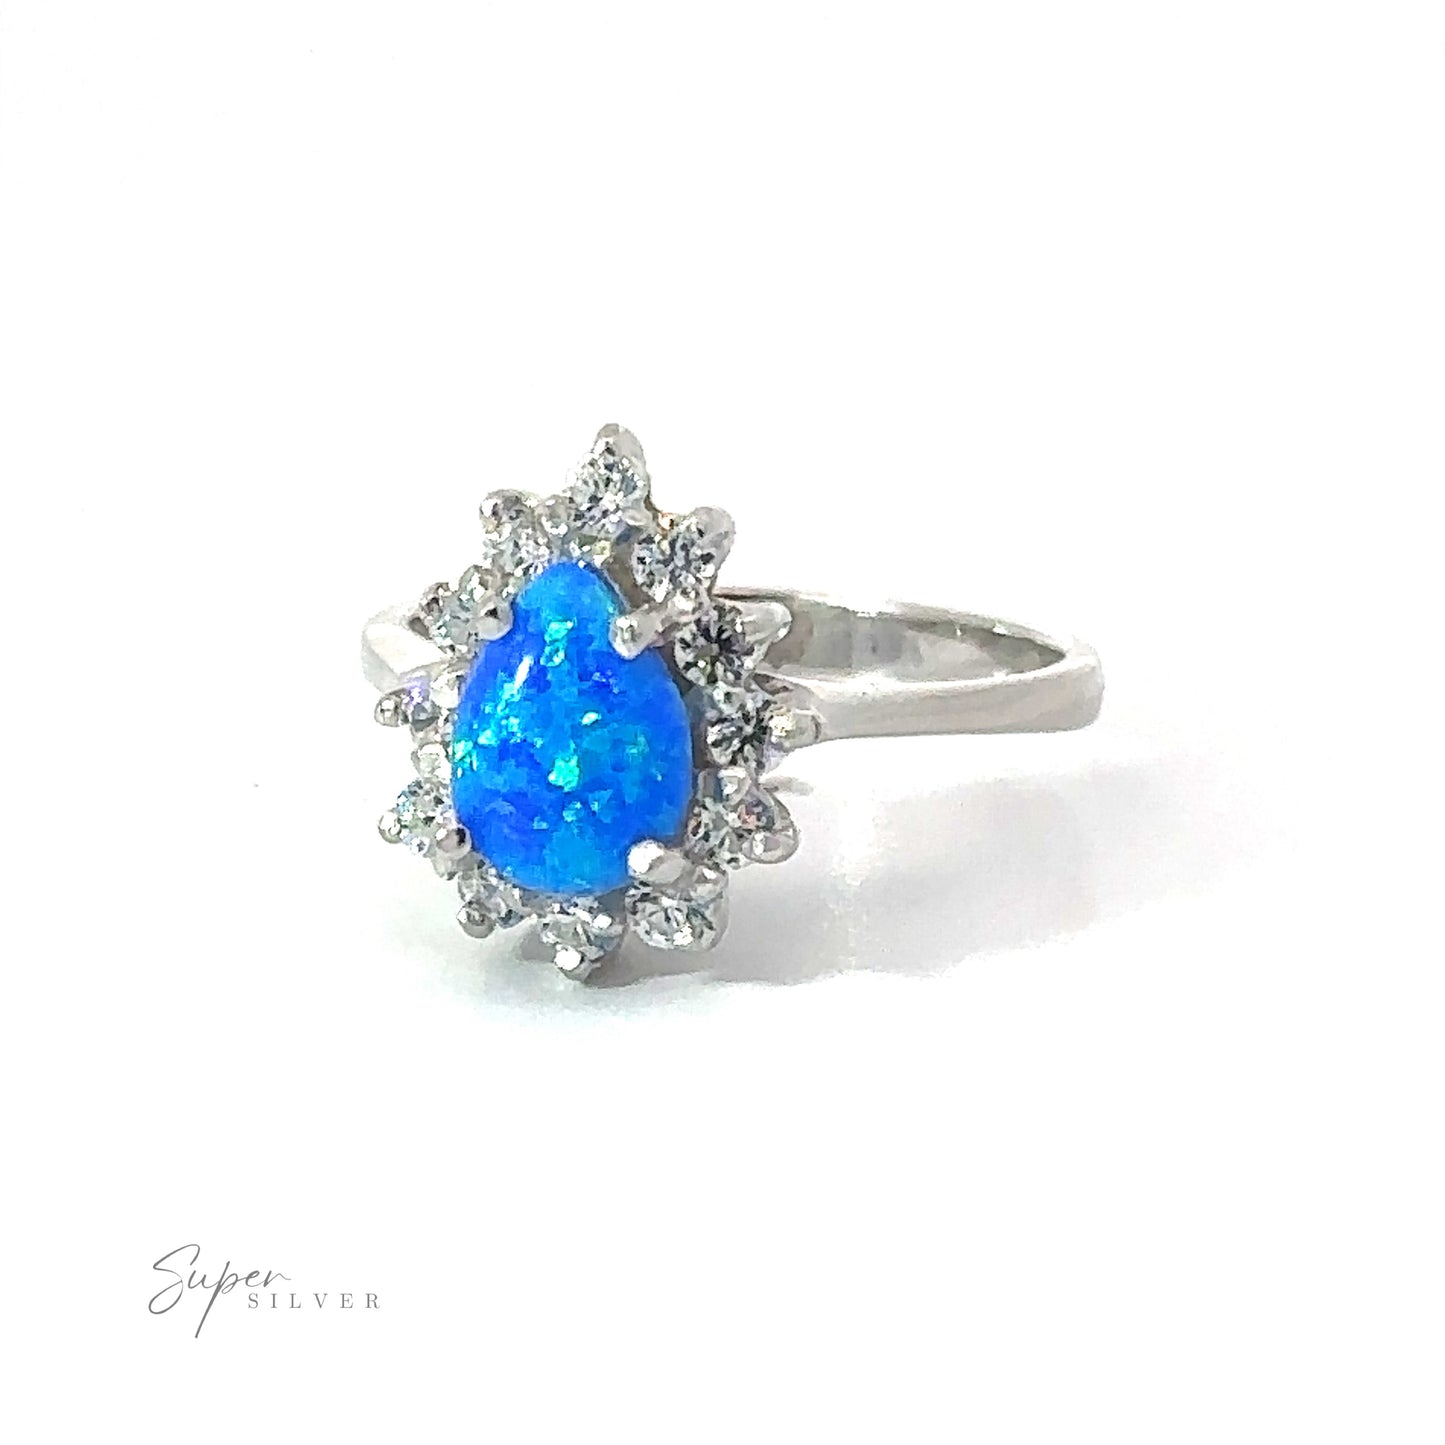 Sentence with updated product name: Silver Opal Teardrop Ring with Cubic Zirconias.